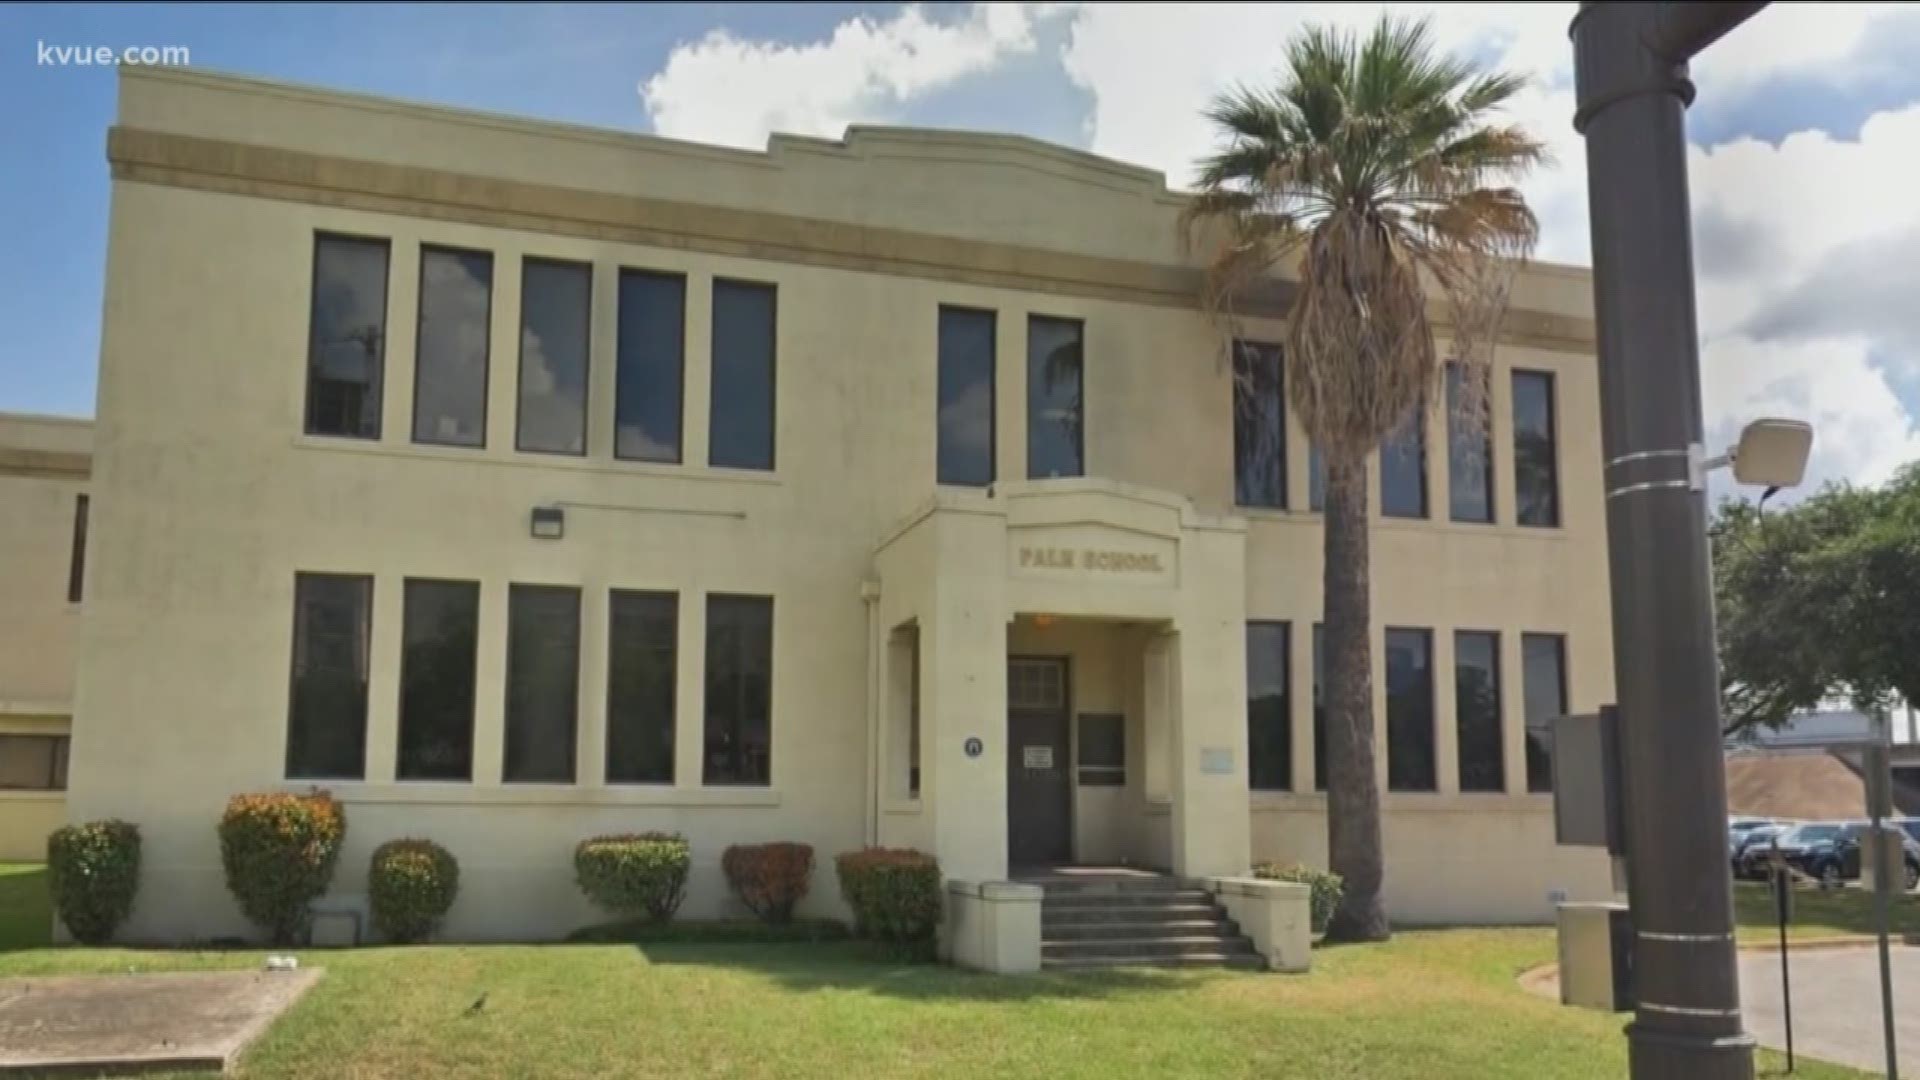 Travis County currently owns the old Palm School building.